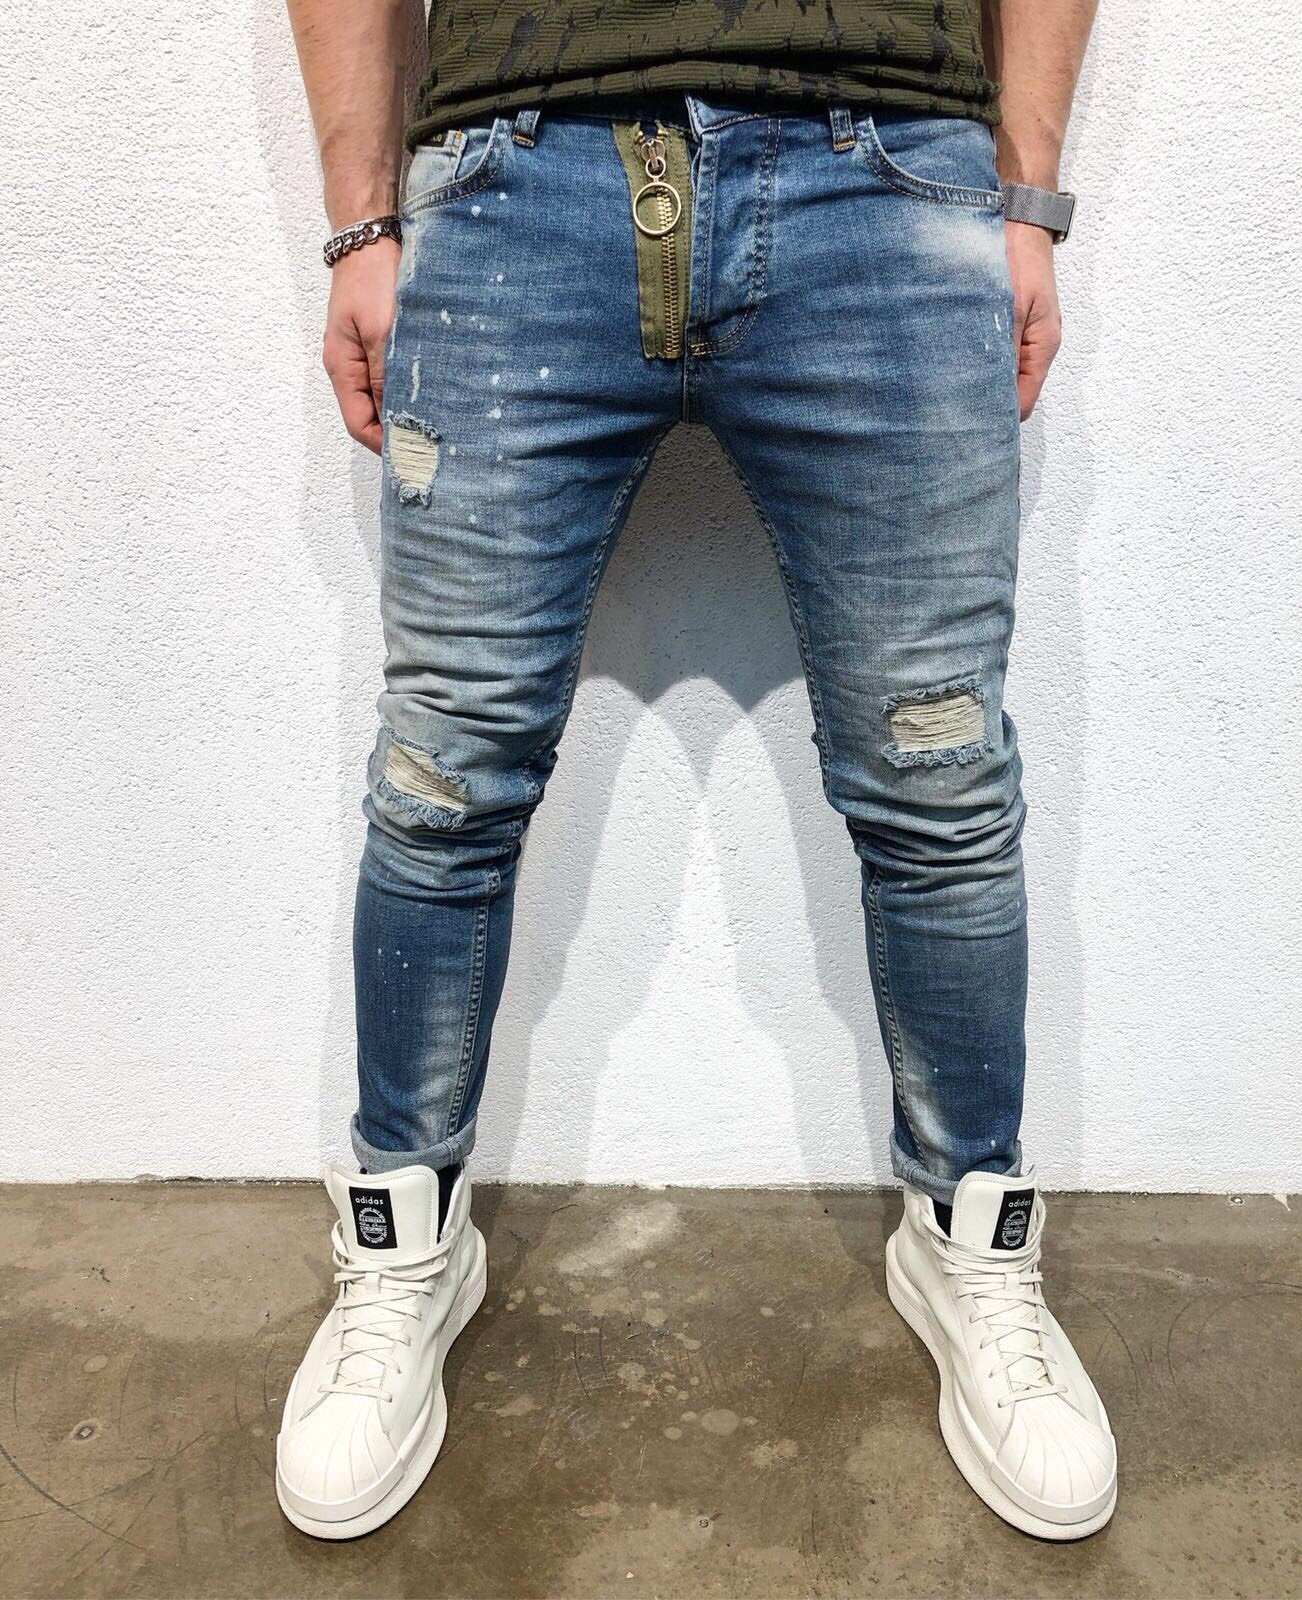 sneaker jeans tictail